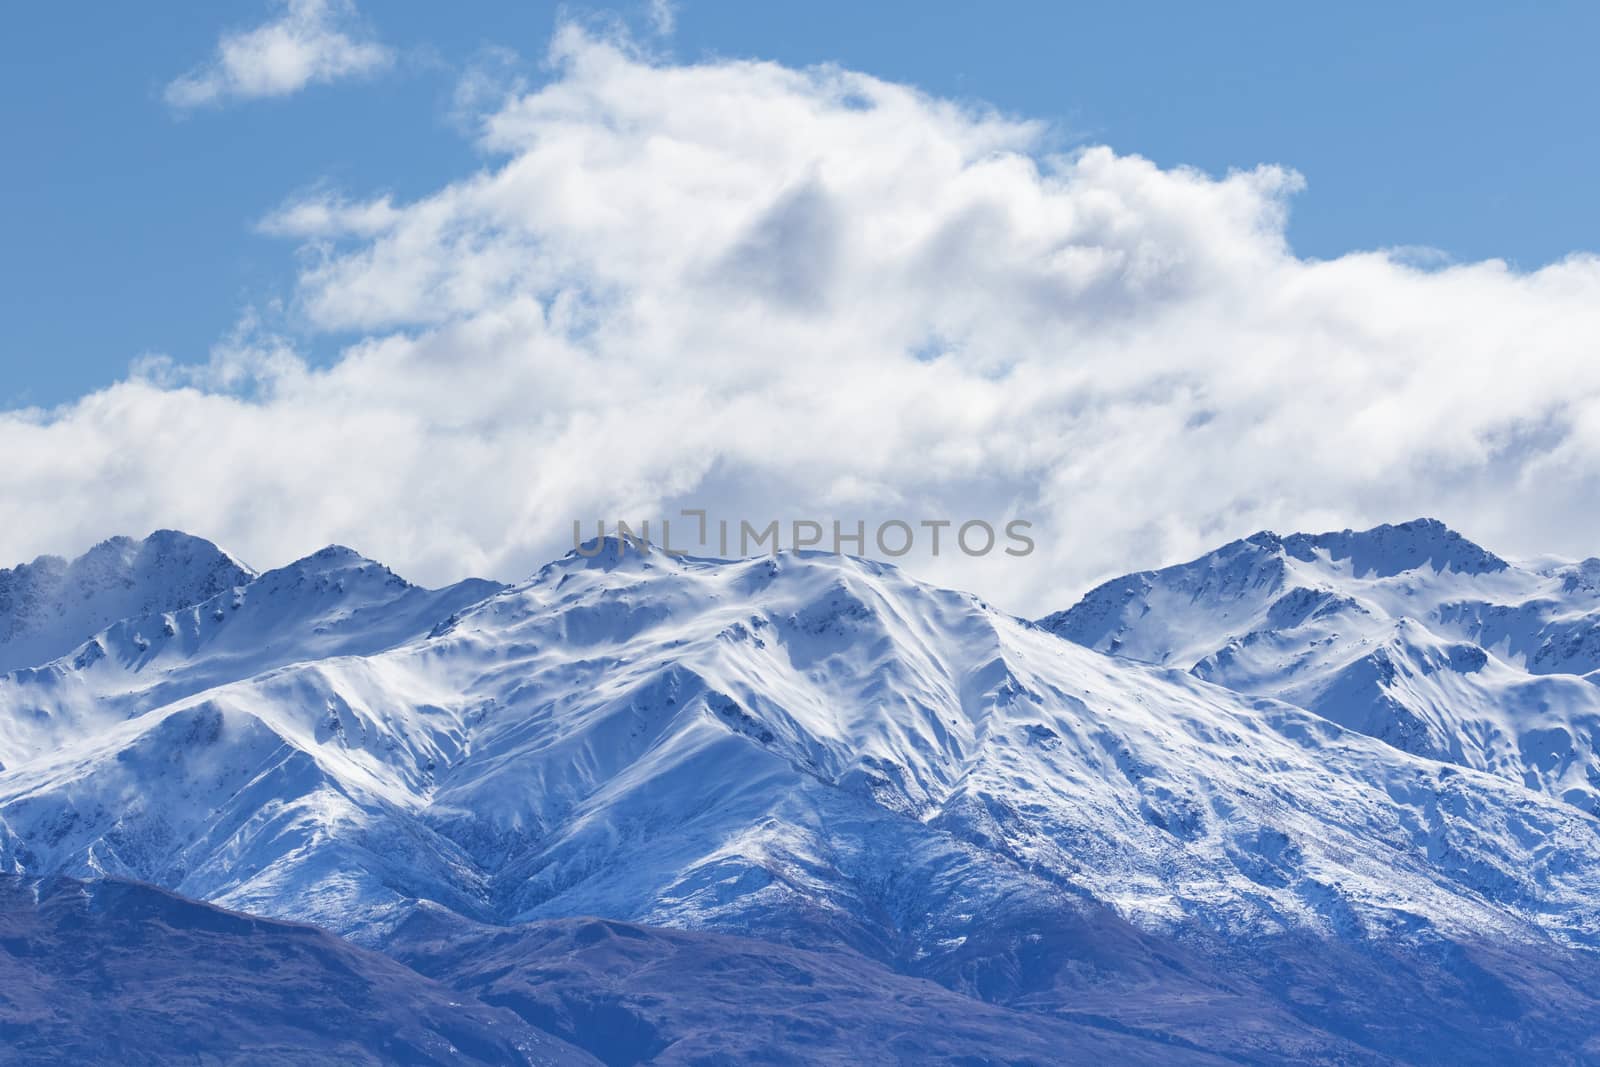 peak of mountain snow with white cloud and blue sky